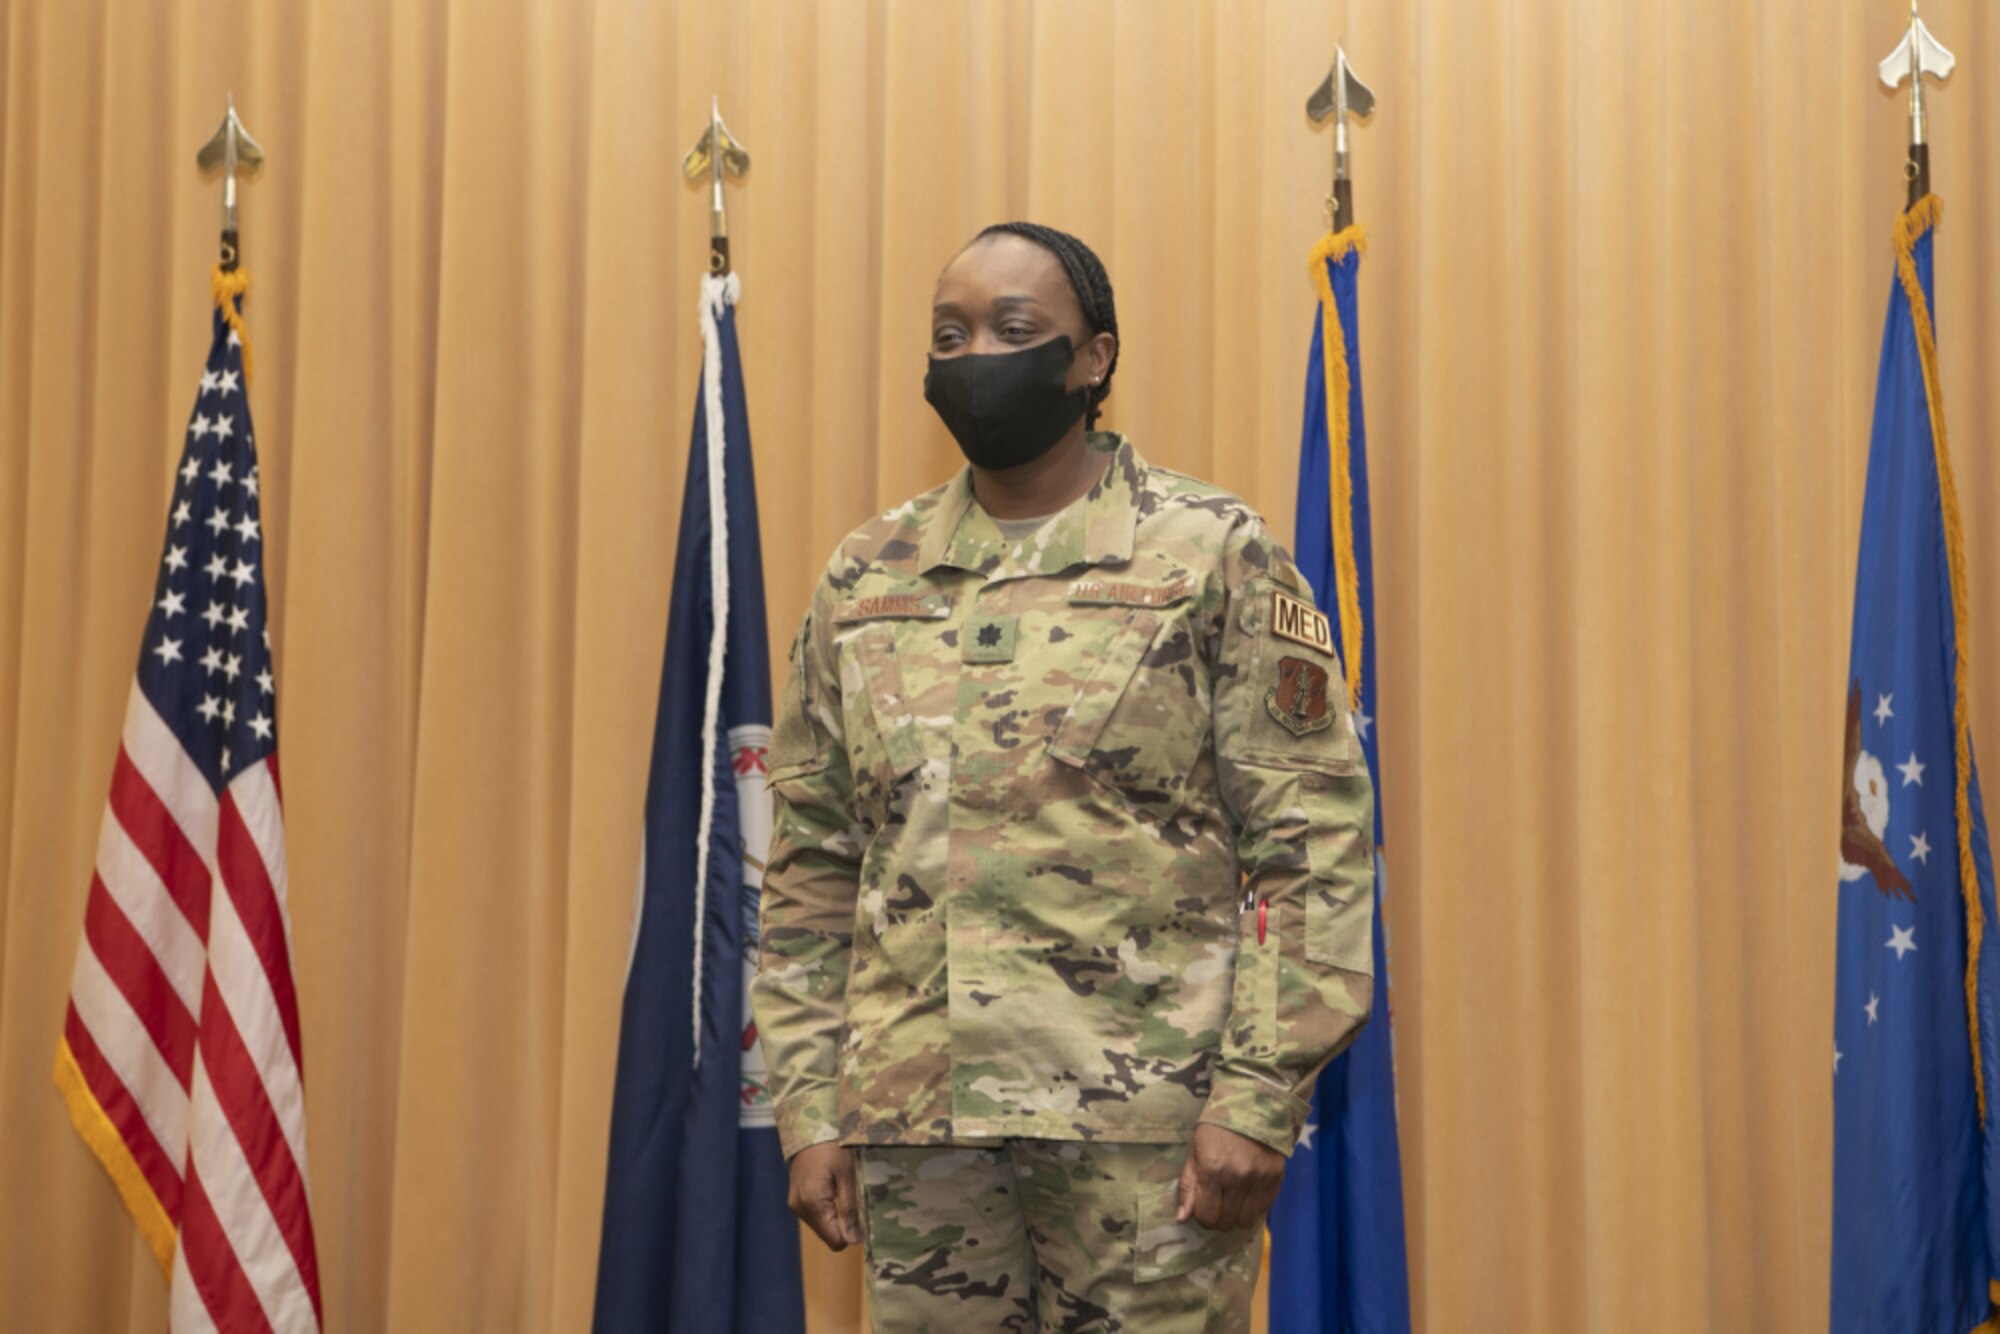 An Airman stands in front of flags